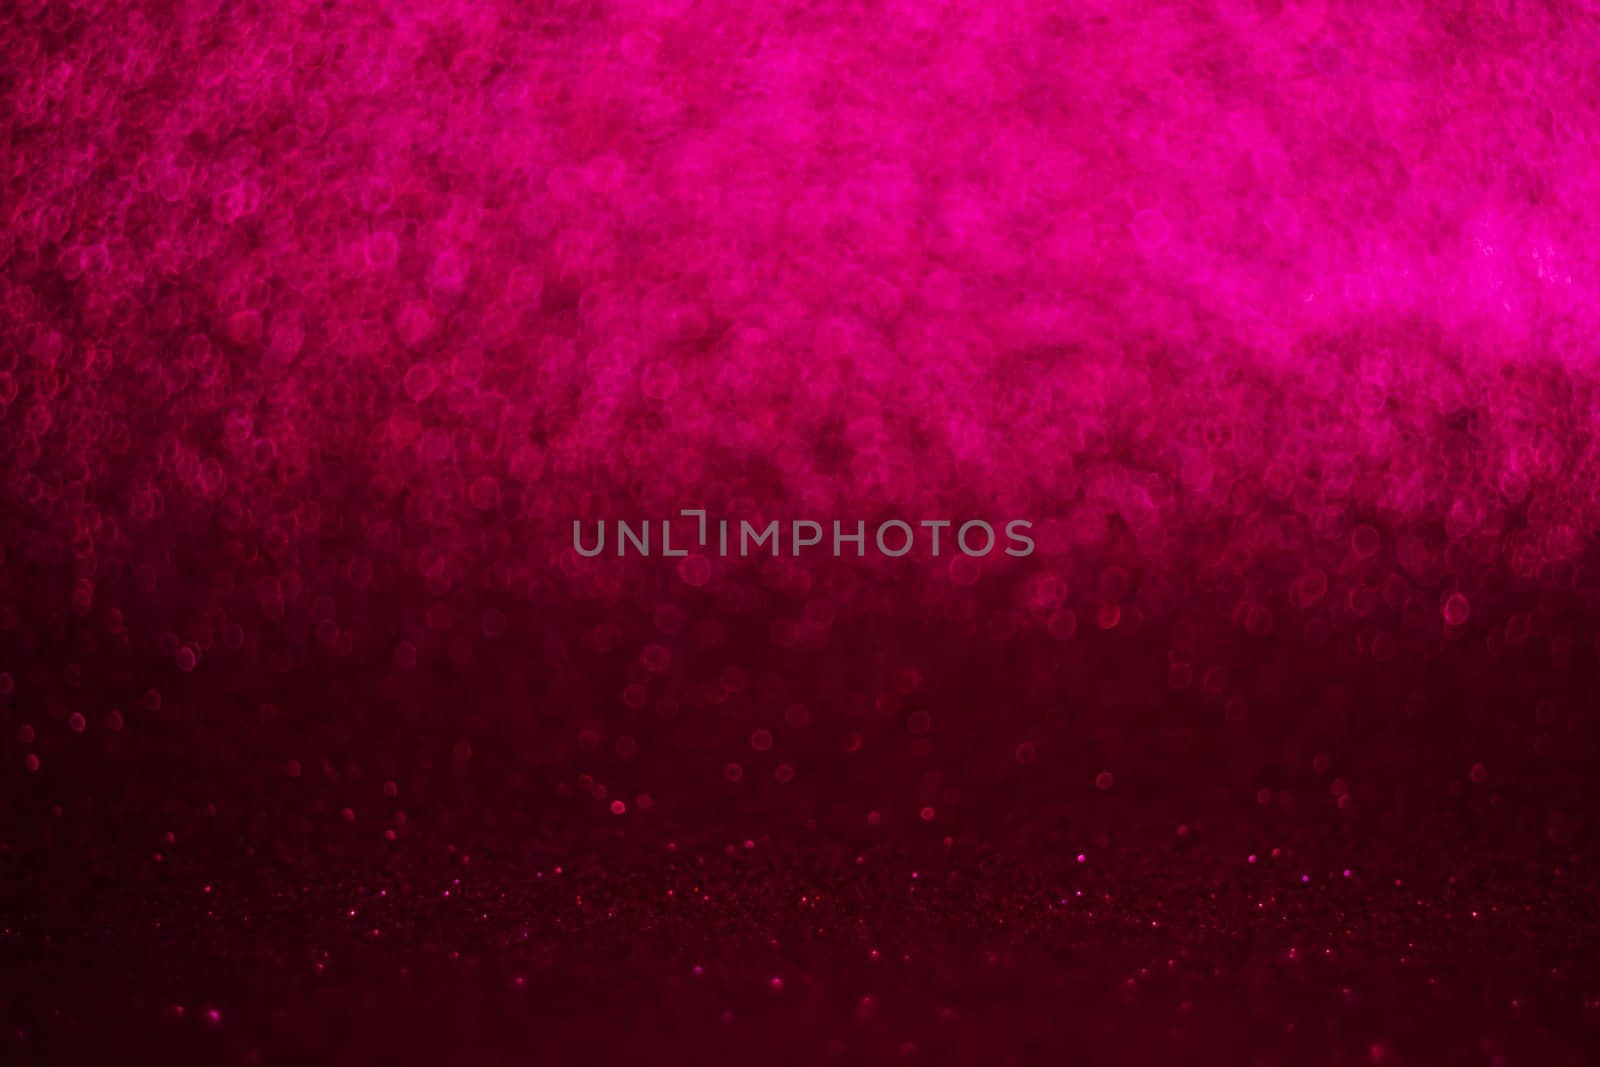 A pink background with a blurry pink line by Alla_Morozova93